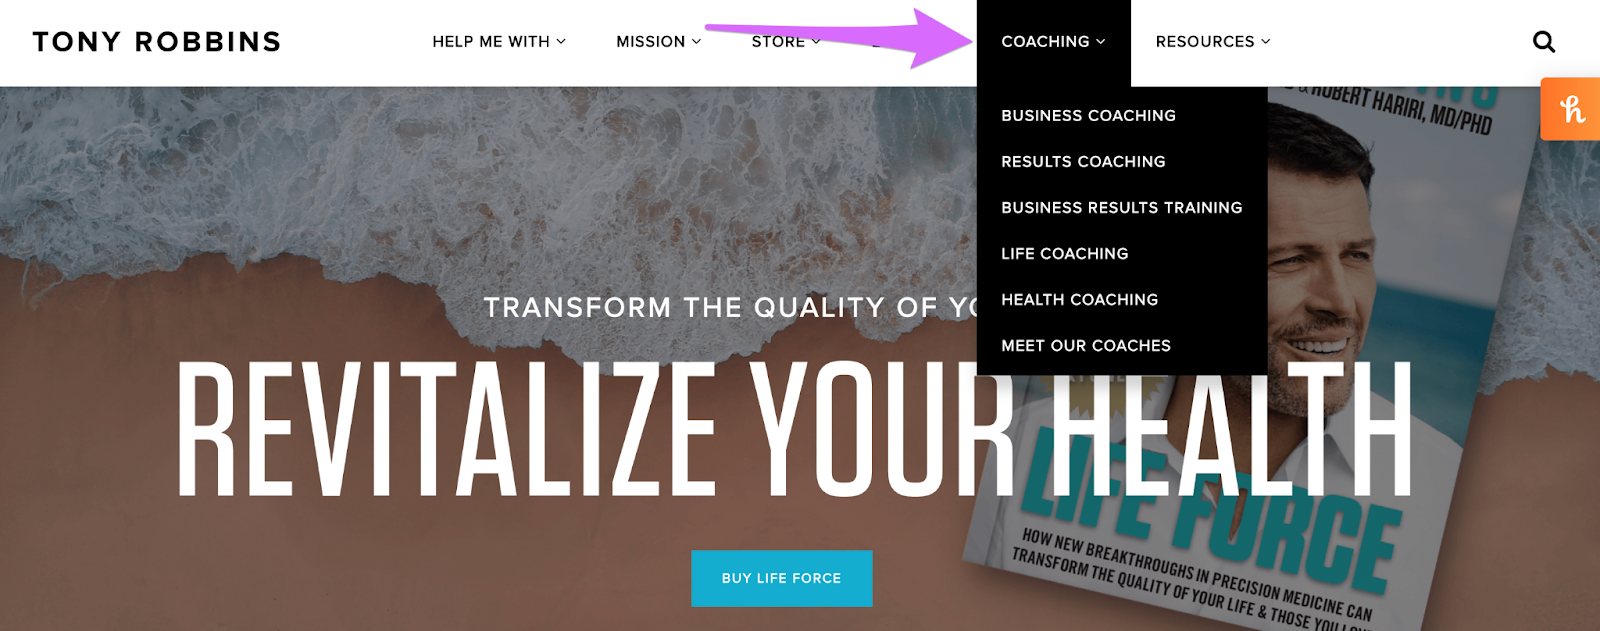 tony robbins website showing his coaching services for how to find affiliate products